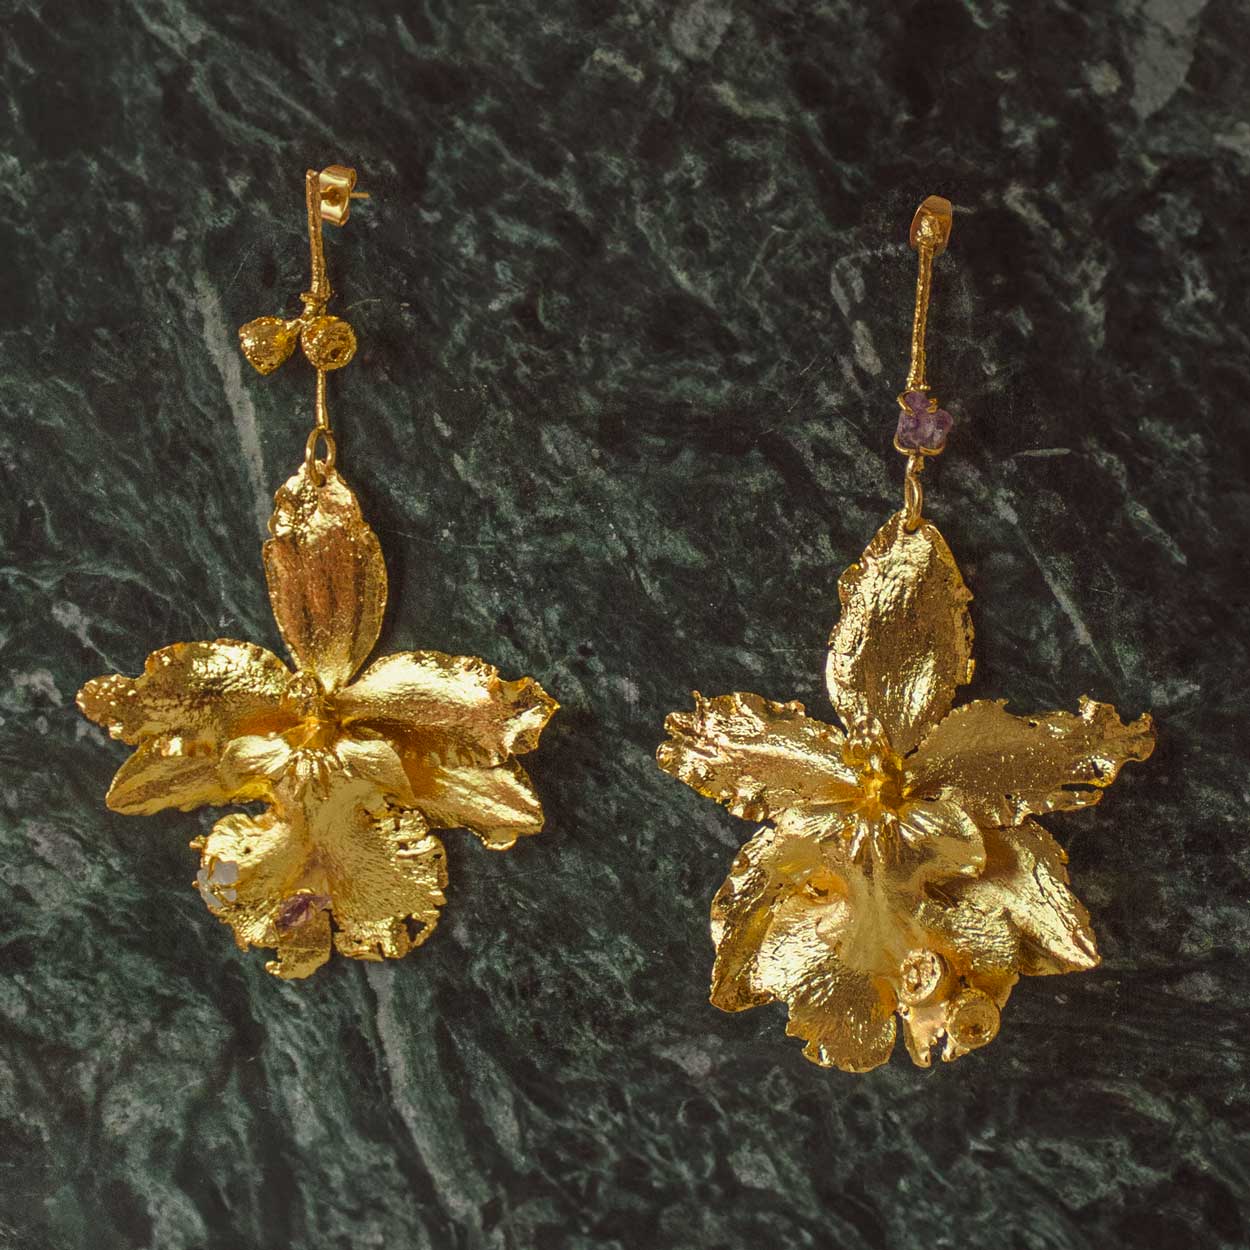 Odontoglossum Orchid Earrings with Quartz Branch in 24k Gold Plating, symbolizing balance, love, and healing